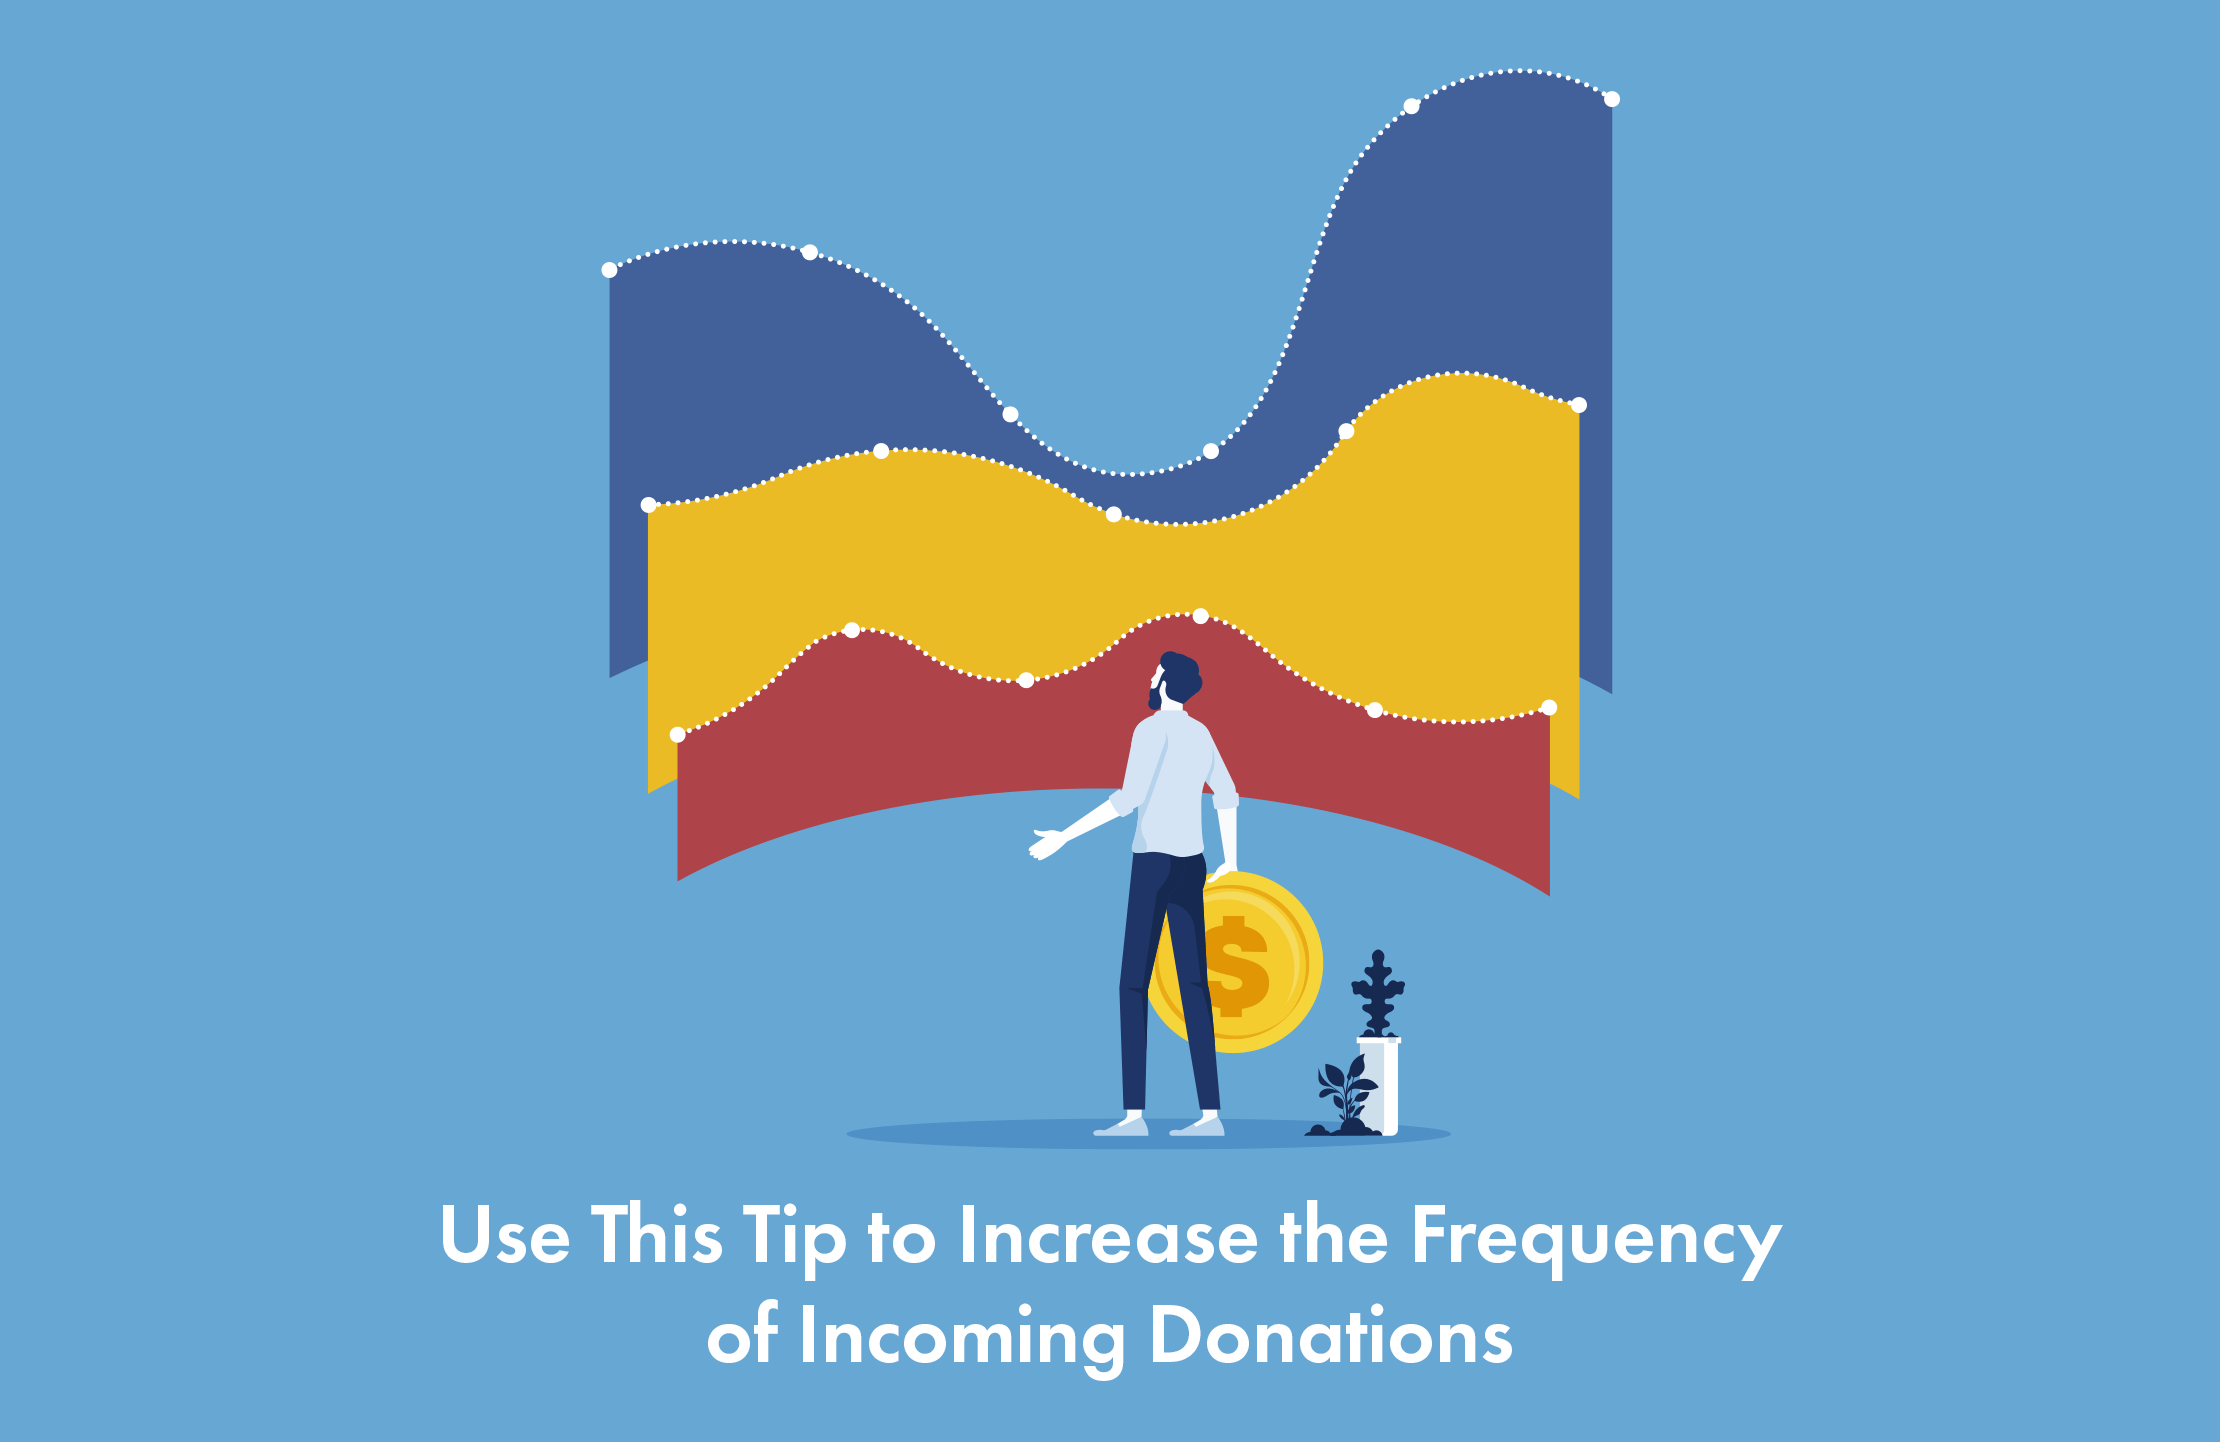 Use This Tip to Increase the Frequency of Incoming Donations